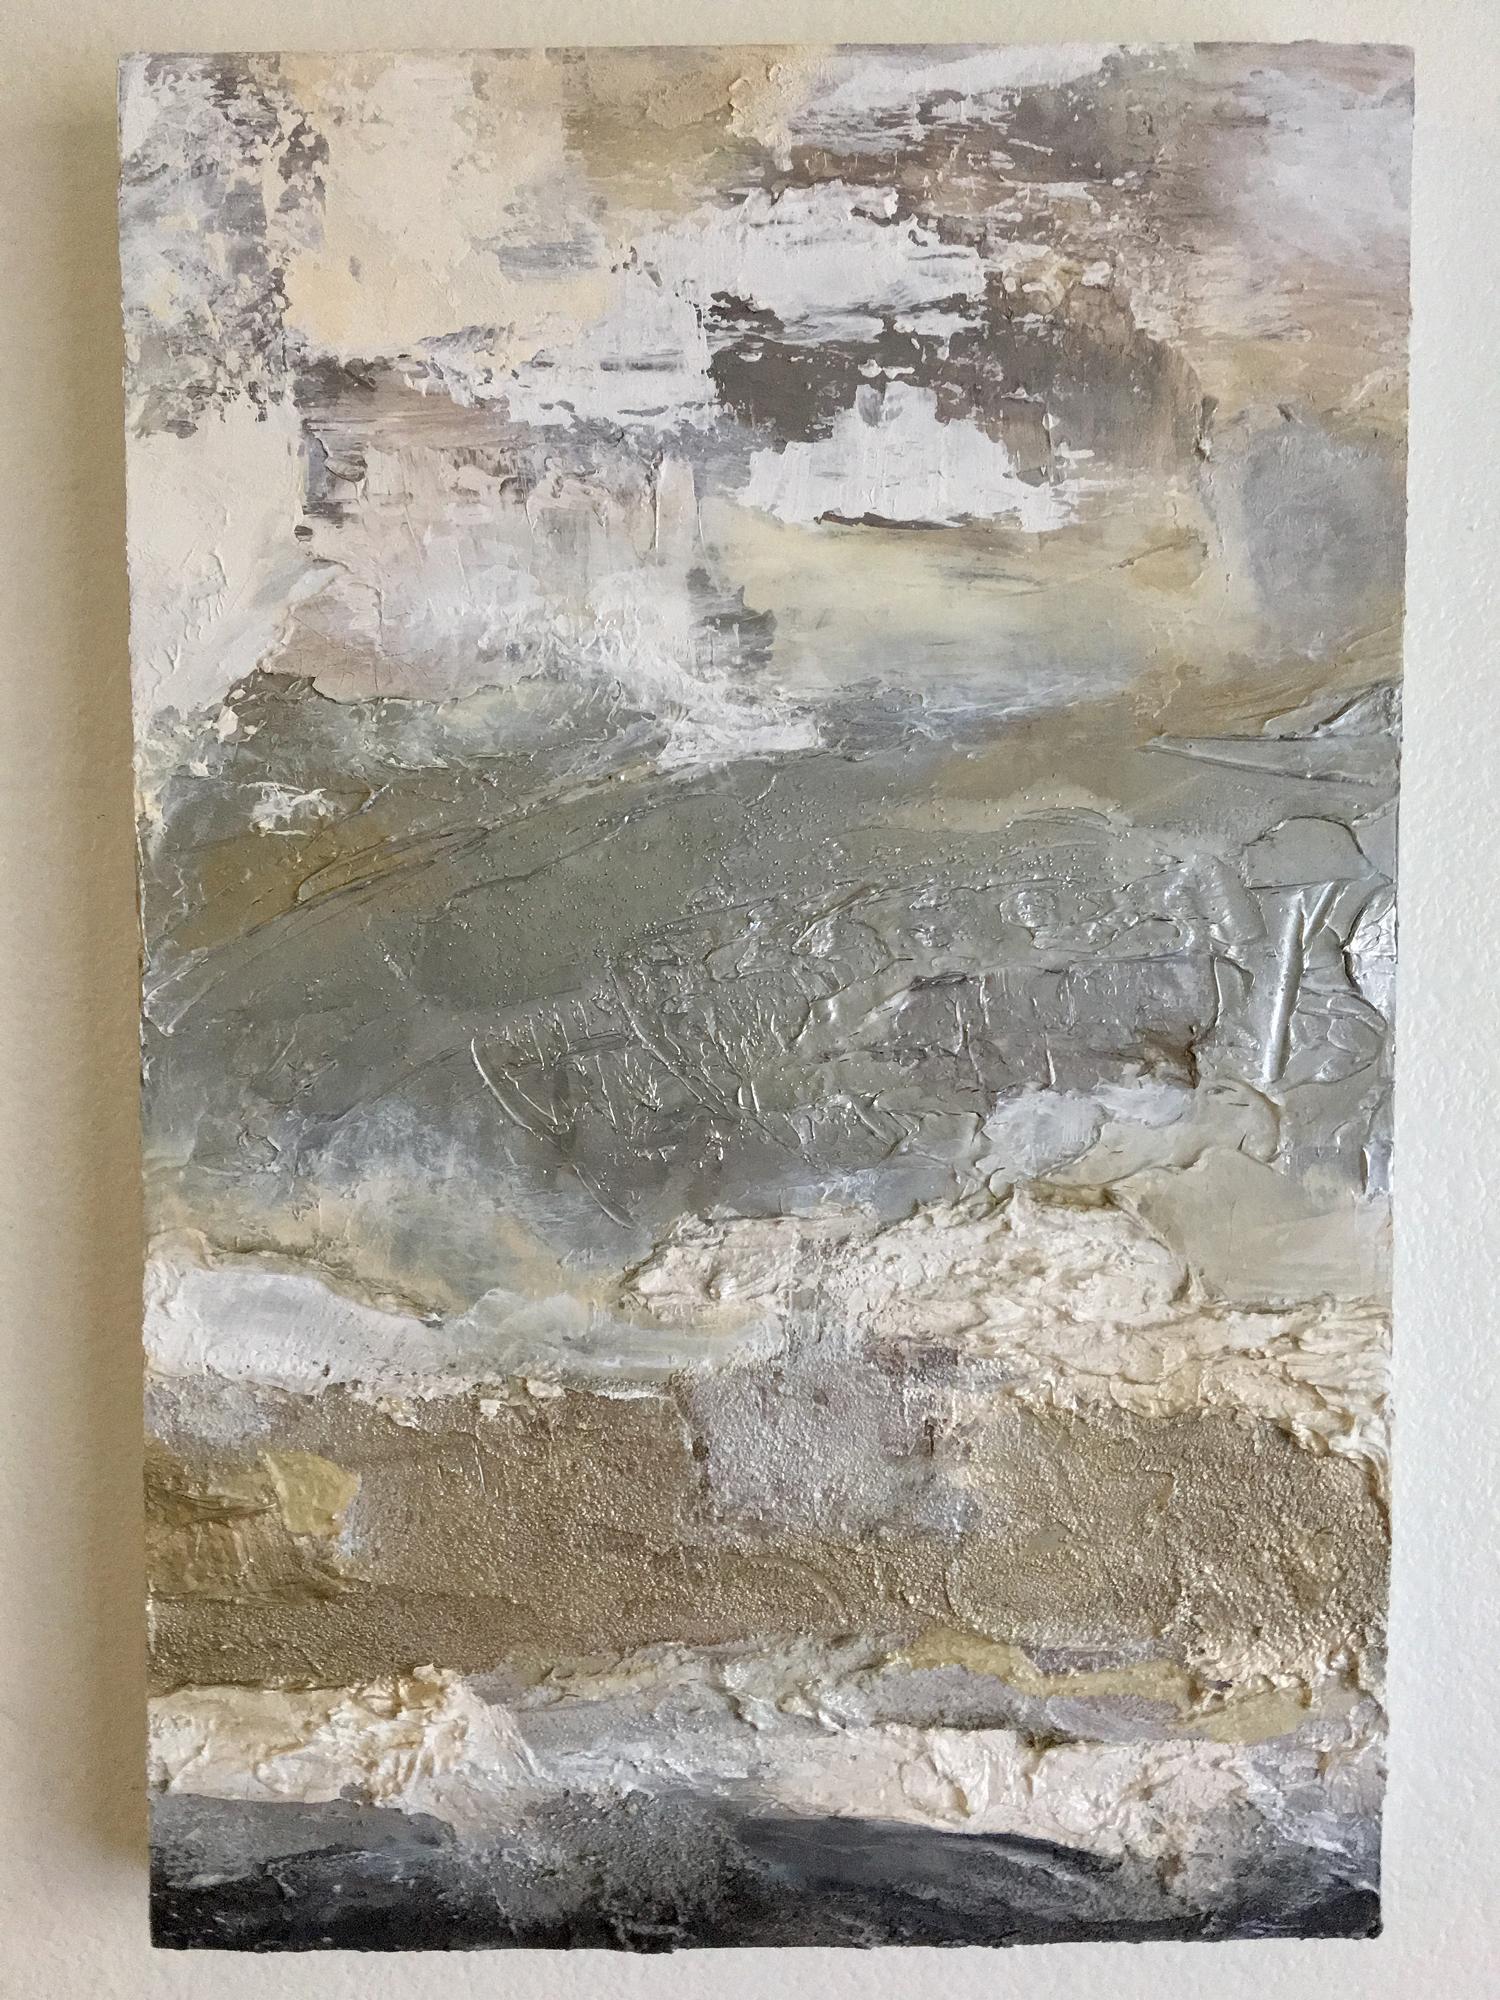 <p>Artist Comments<br /> My Sue;o - My Heart.   My inspiration came from a dream where I was painting  en plein air  in a beach setting. This series was painted on the beach in my dream and may be interpreted as purely abstract, landscape, or